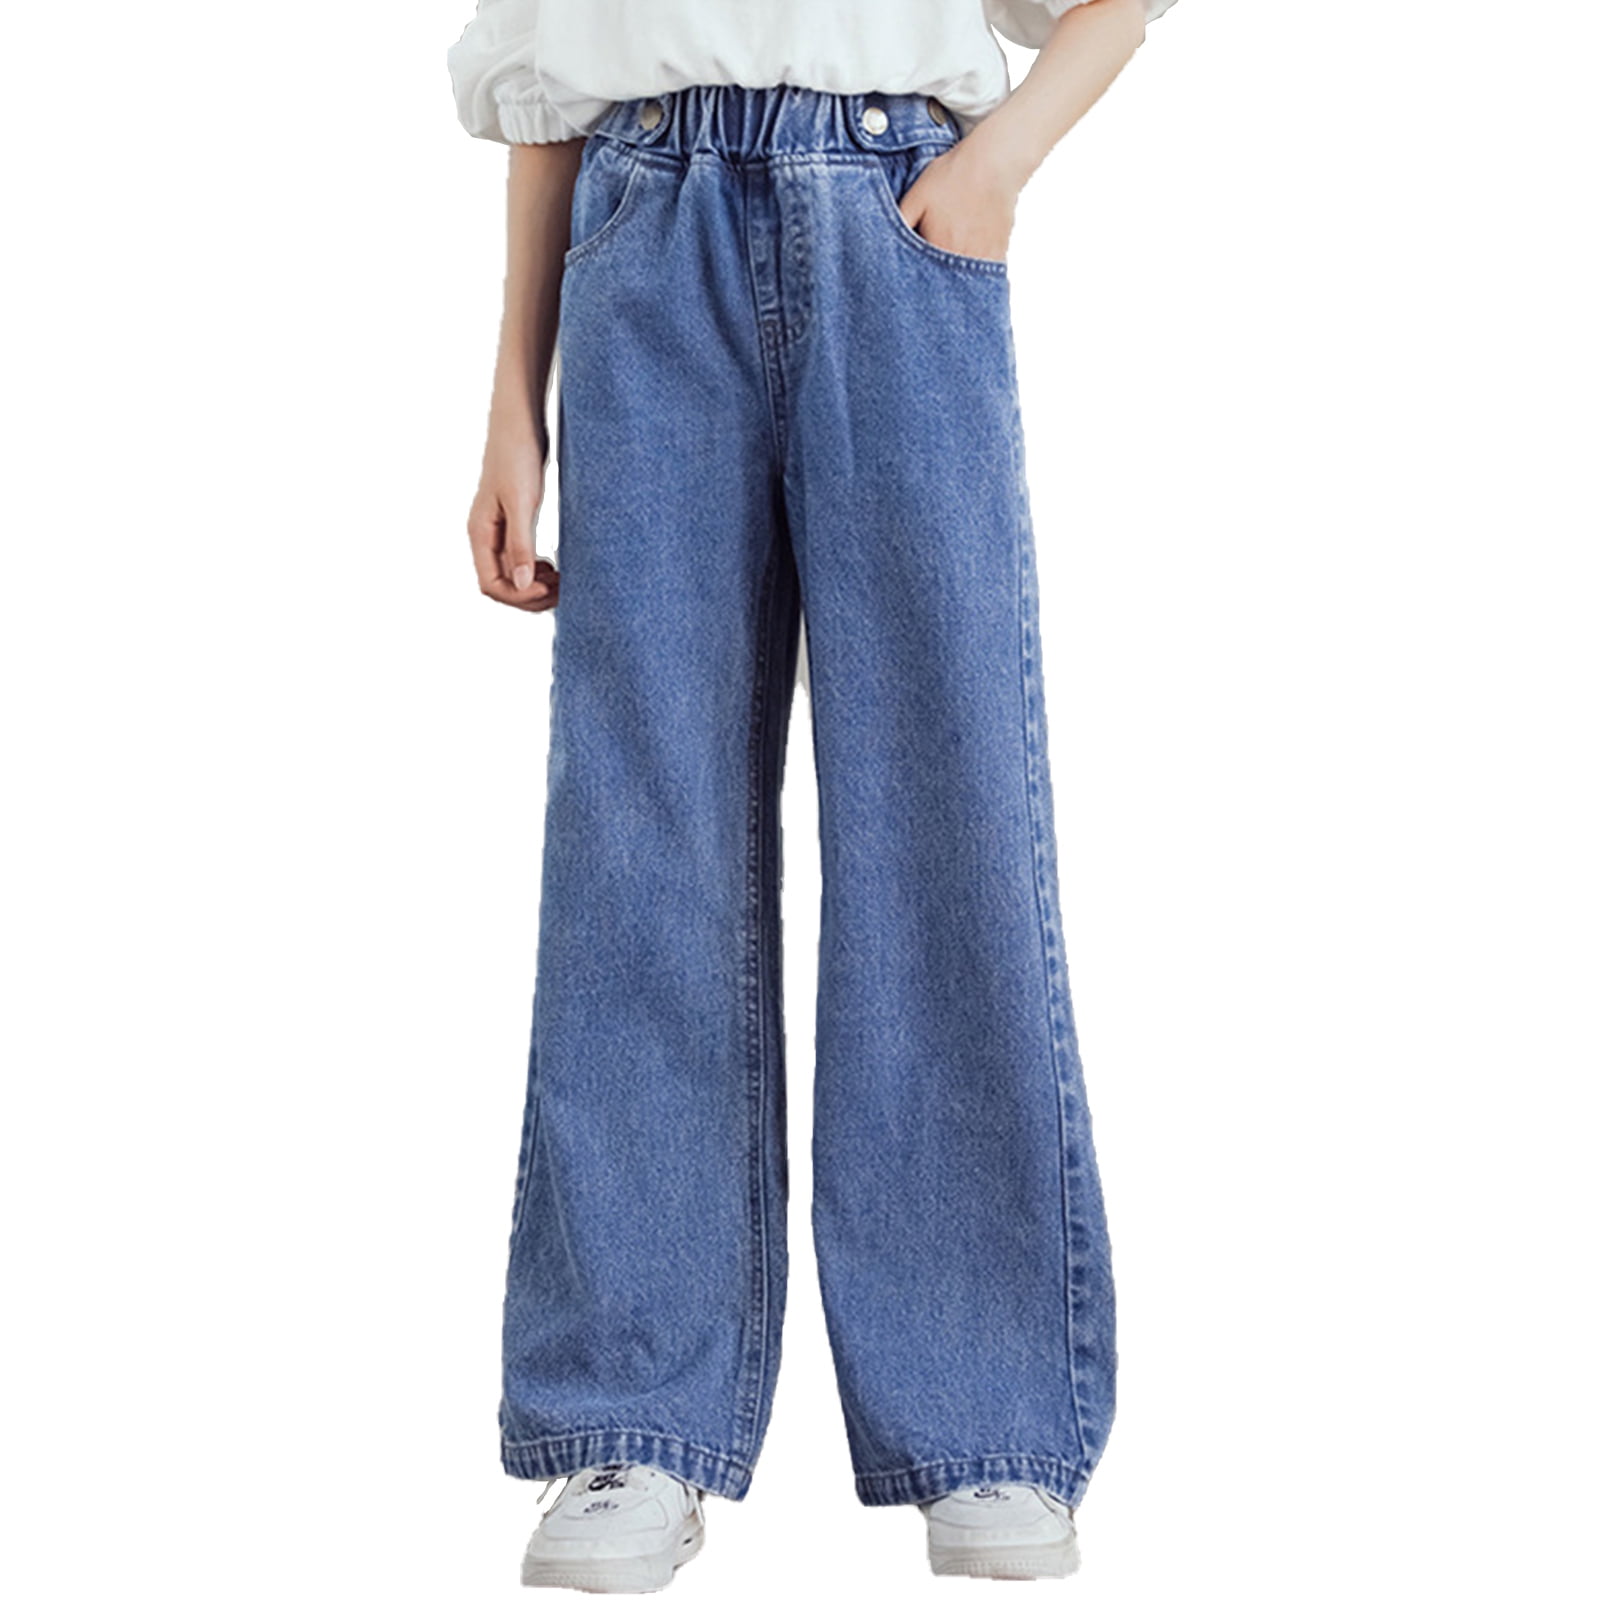  Kids Girls' Casual Wide Leg Baggy Ripped Jeans Cool Loose Fit  Distressed Denim Pants Size 5-14 Years(Blue1,5-6 Years): Clothing, Shoes &  Jewelry